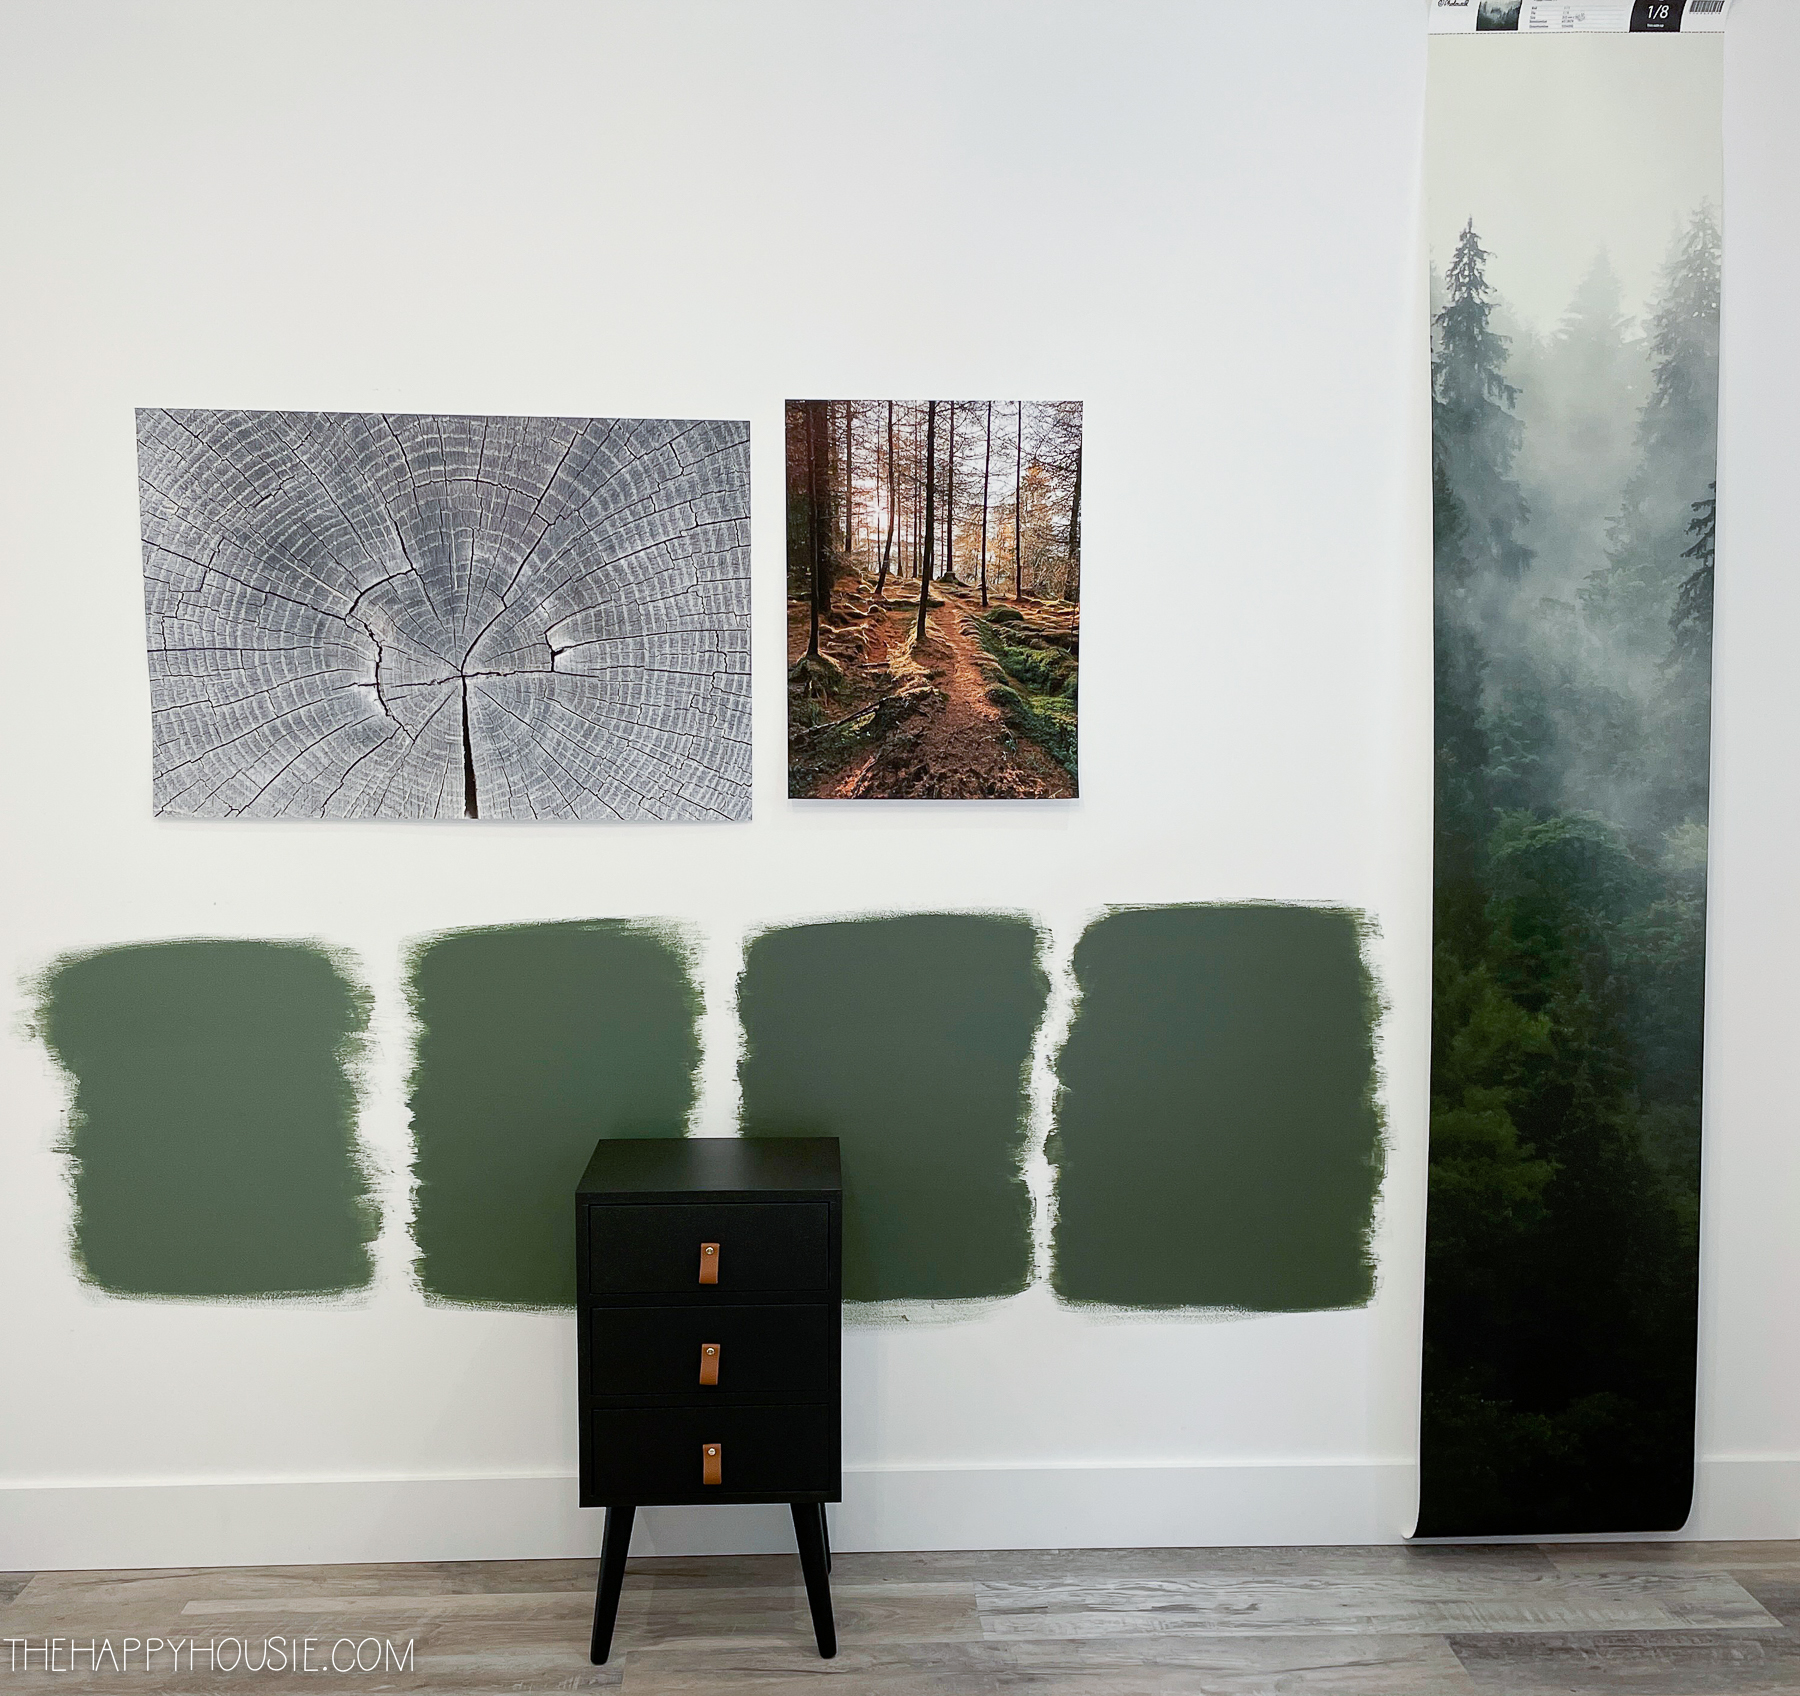 Benjamin Moore Cushing Green, Peale Green, Boreal Forest and Backwoods painted on the wall as samples